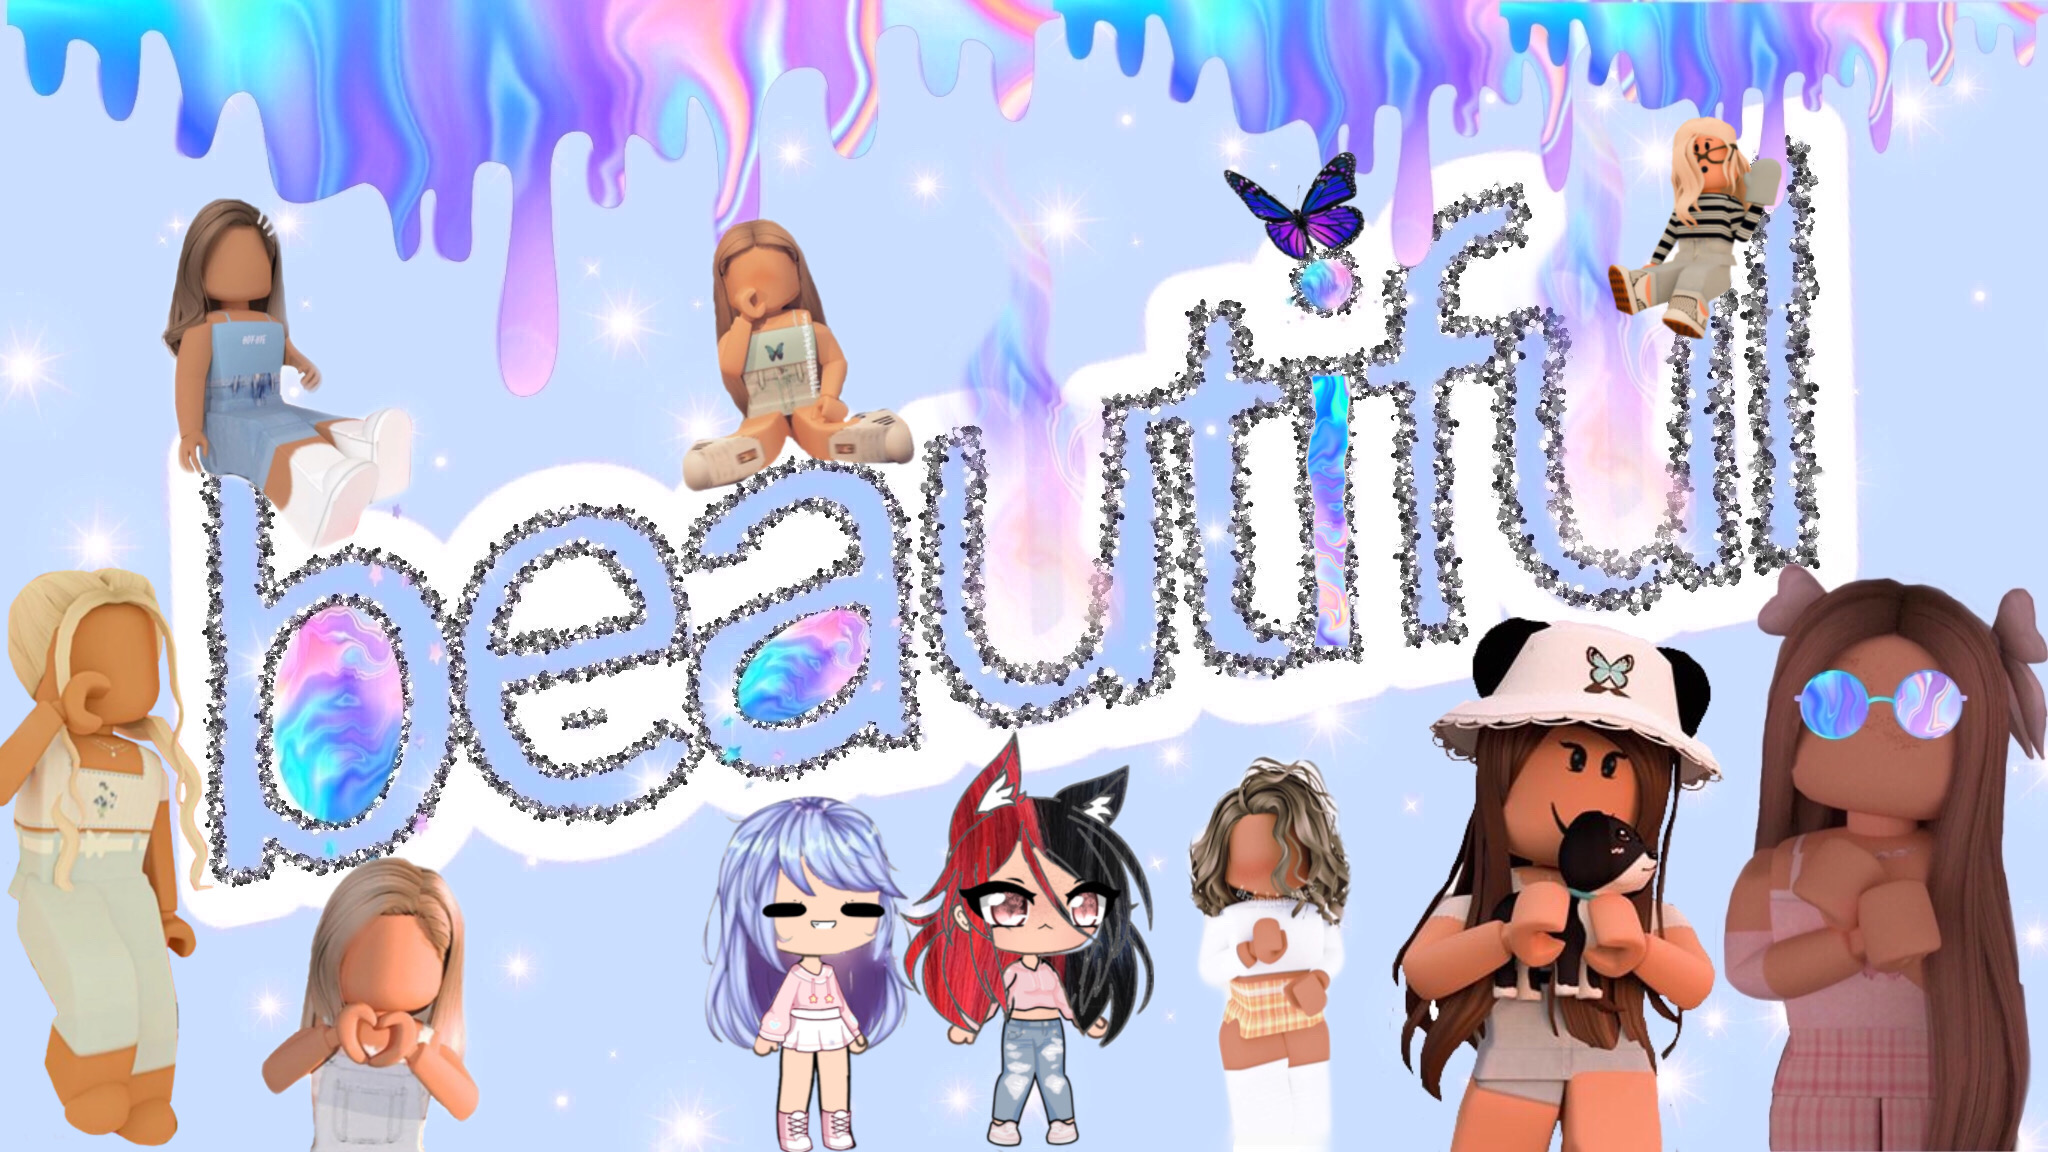 Roblox Beatyfull Image By Learn To Love Not To Hate - imagenes de roblox de 2048x1152